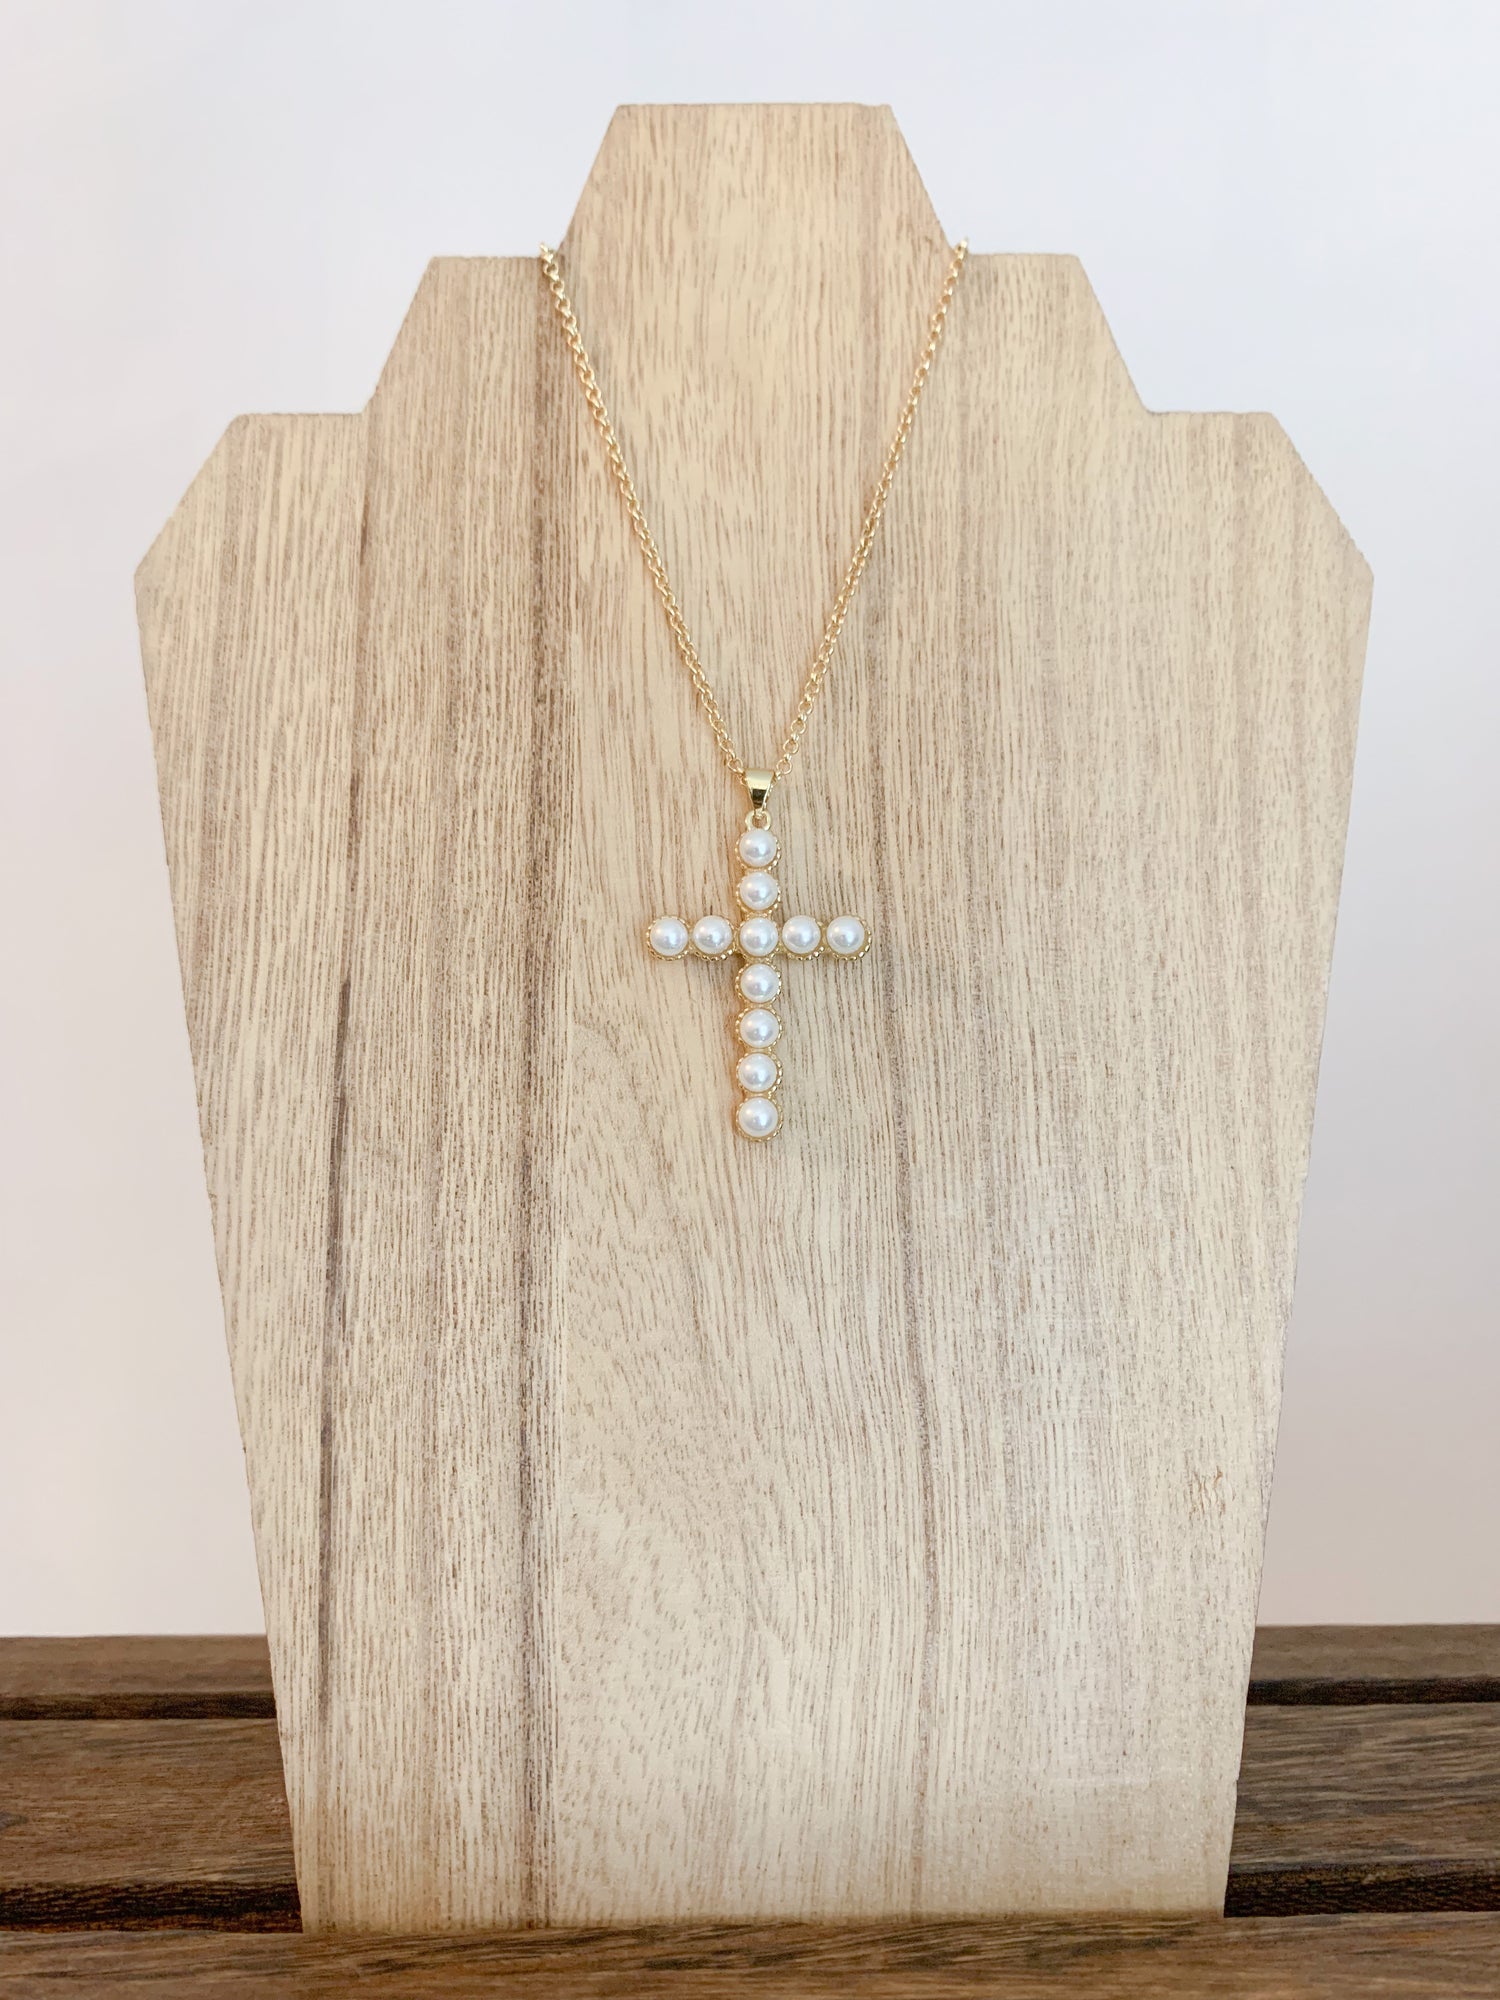 18k gold plated pearl cross necklace on a white background, with the cross centerpiece in focus. A beautiful and elegant jewelry piece to add to your collection.